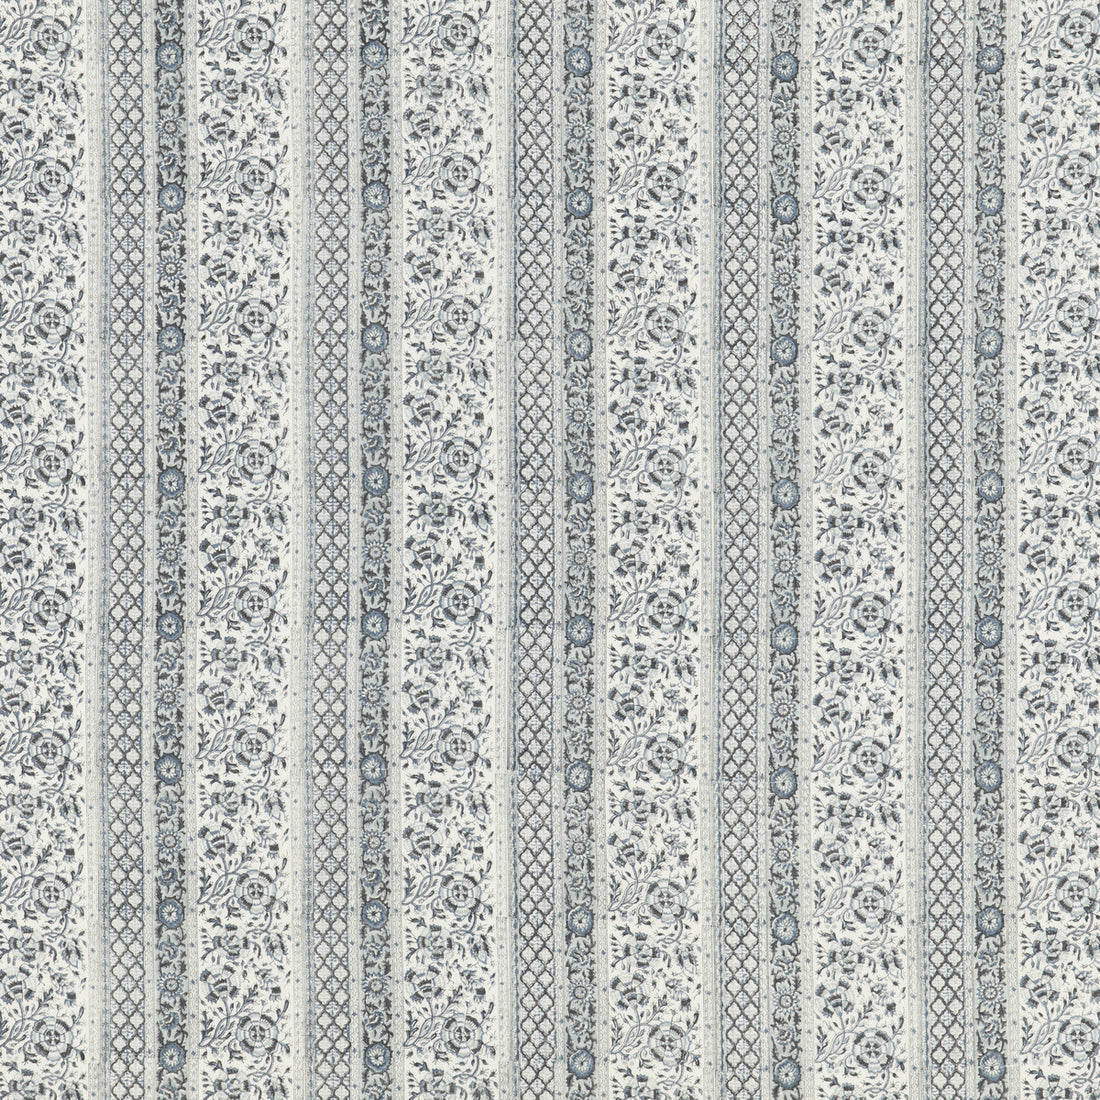 Tillington fabric in blue color - pattern BP10912.1.0 - by G P &amp; J Baker in the Portobello collection